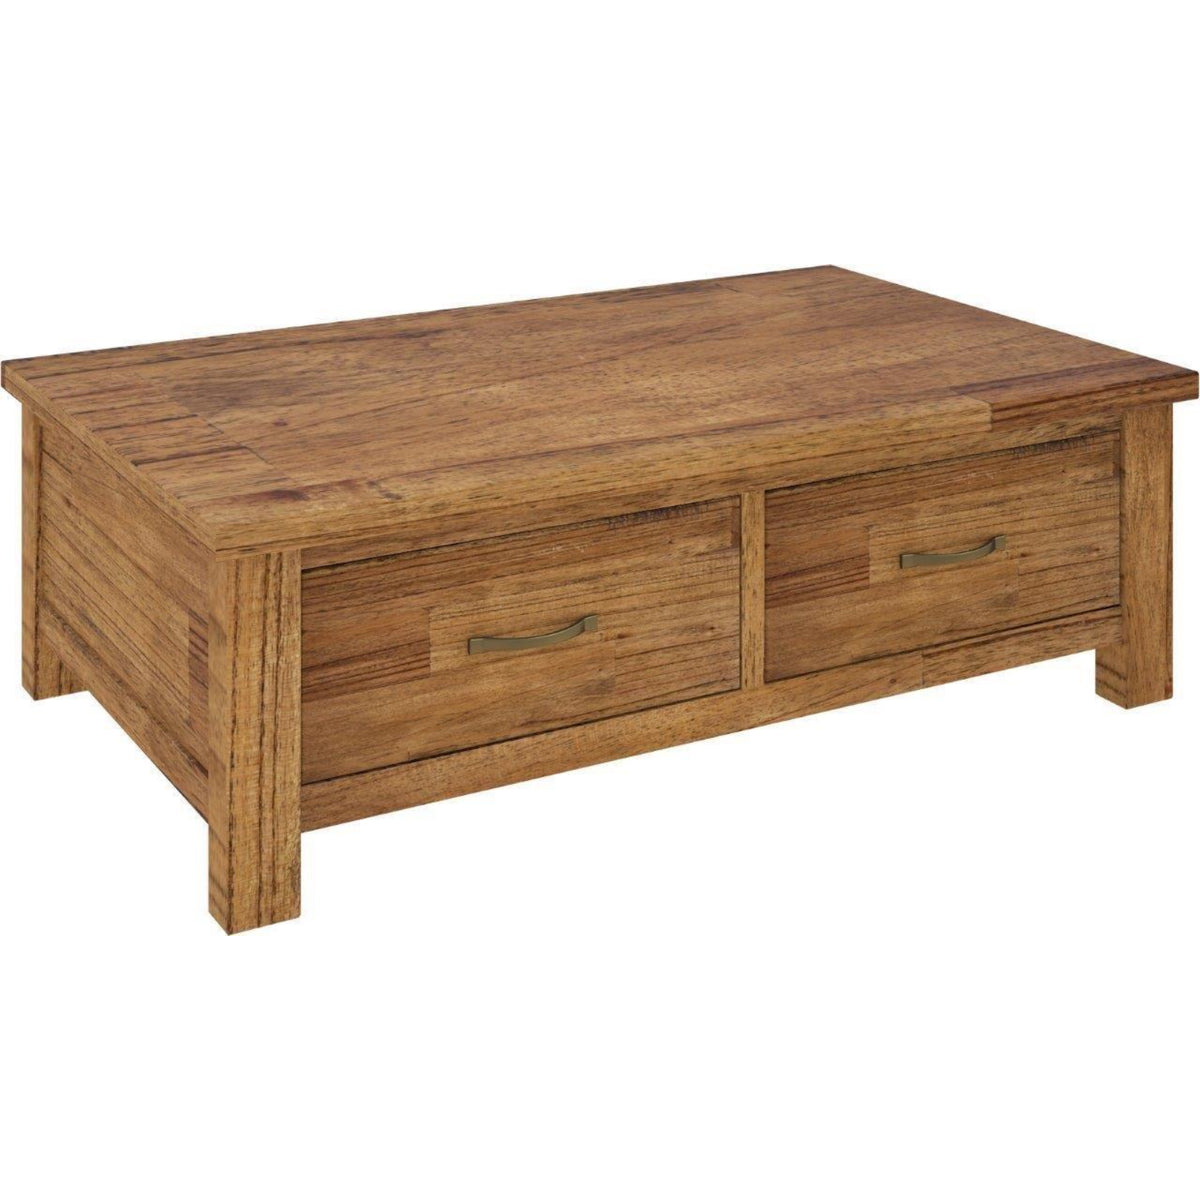 Birdsville Coffee Table 2 Drawer Solid Mt Ash Timber Wood in Brown - 120cm - Notbrand